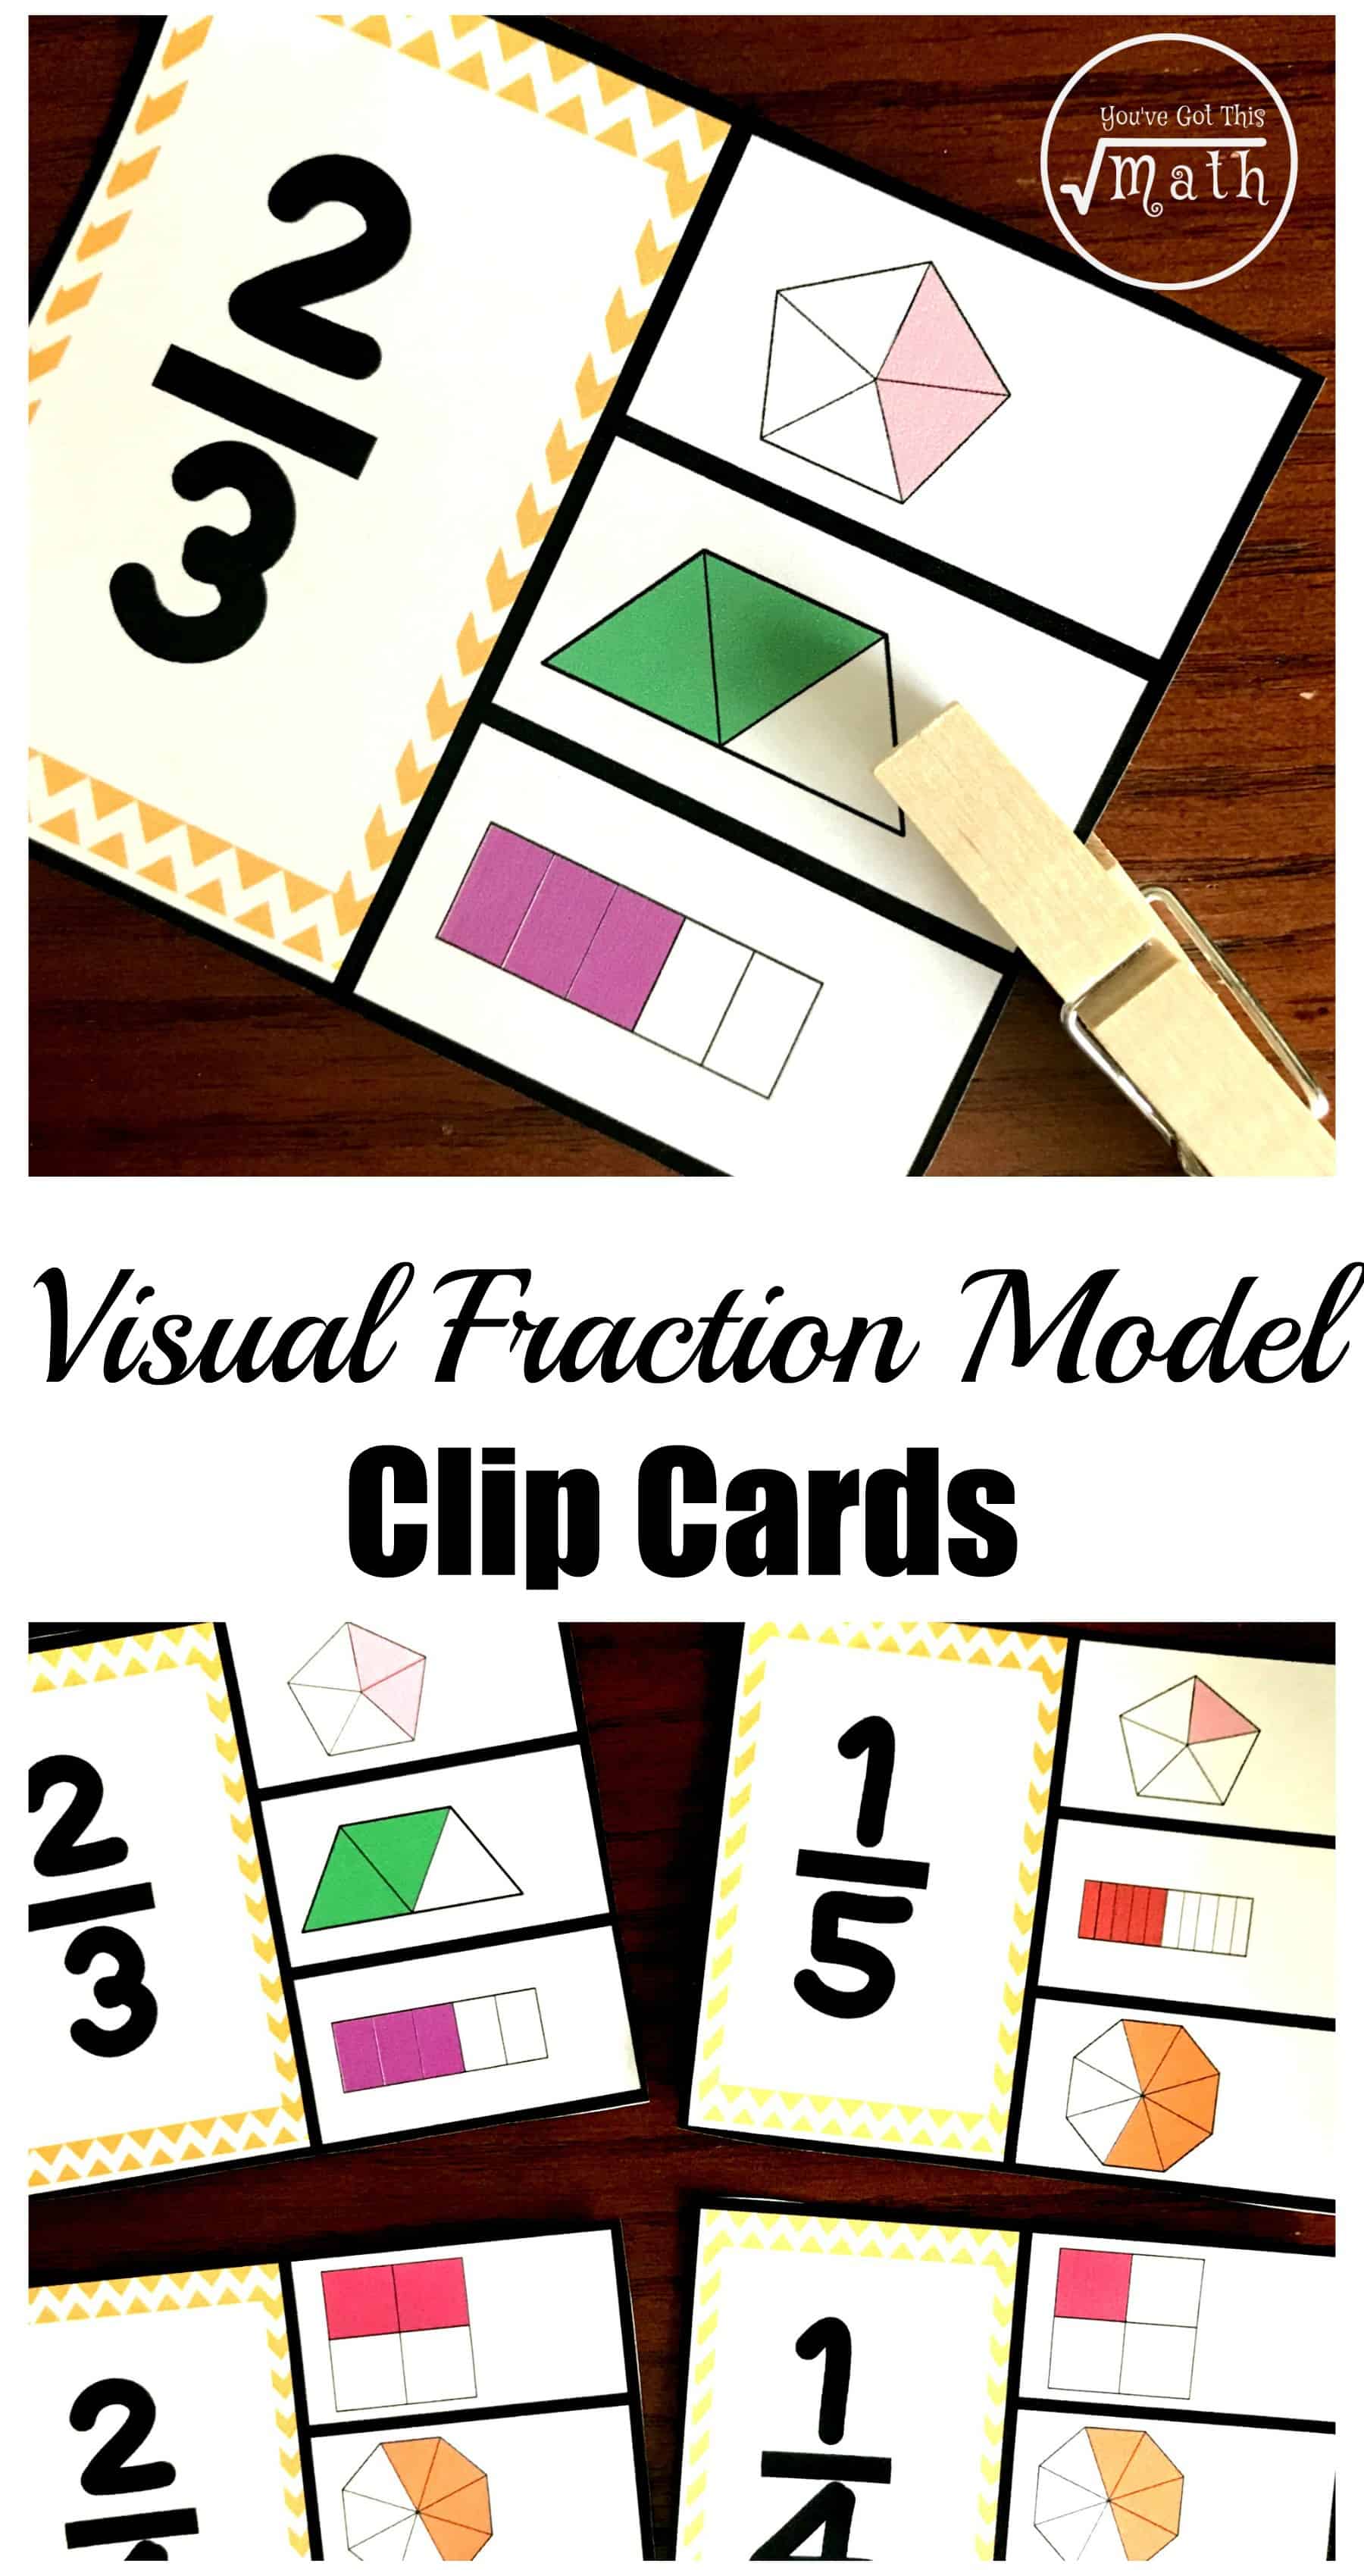 Visual fraction model clip cards on a wooden table. 